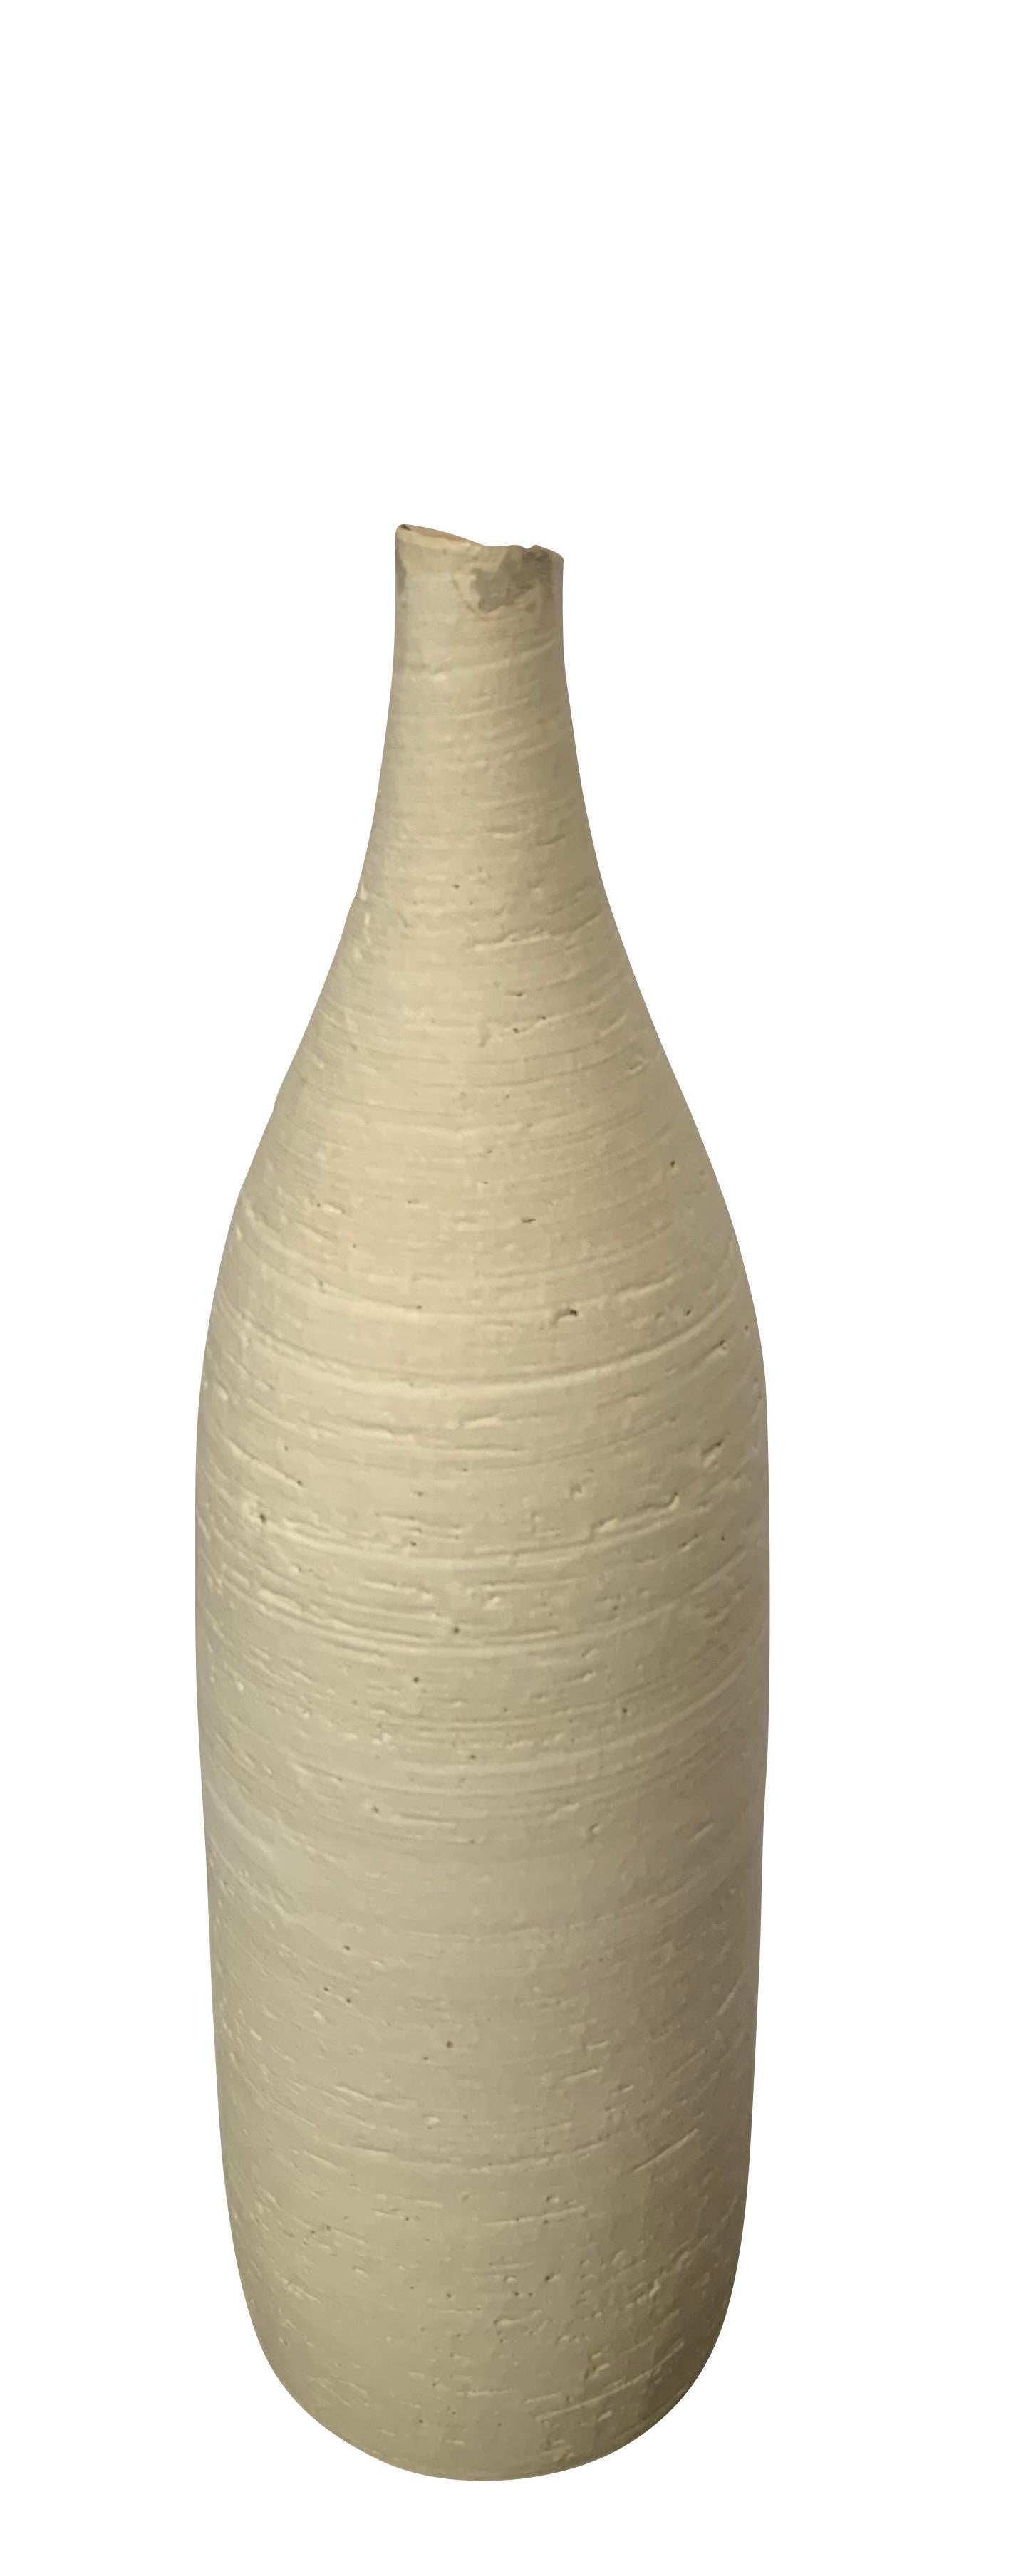 Contemporary German handmade stoneware vase.
Sand color.
Textured with small lip opening.
Part of a large collection of handmade vases of different sizes , shapes and textures.